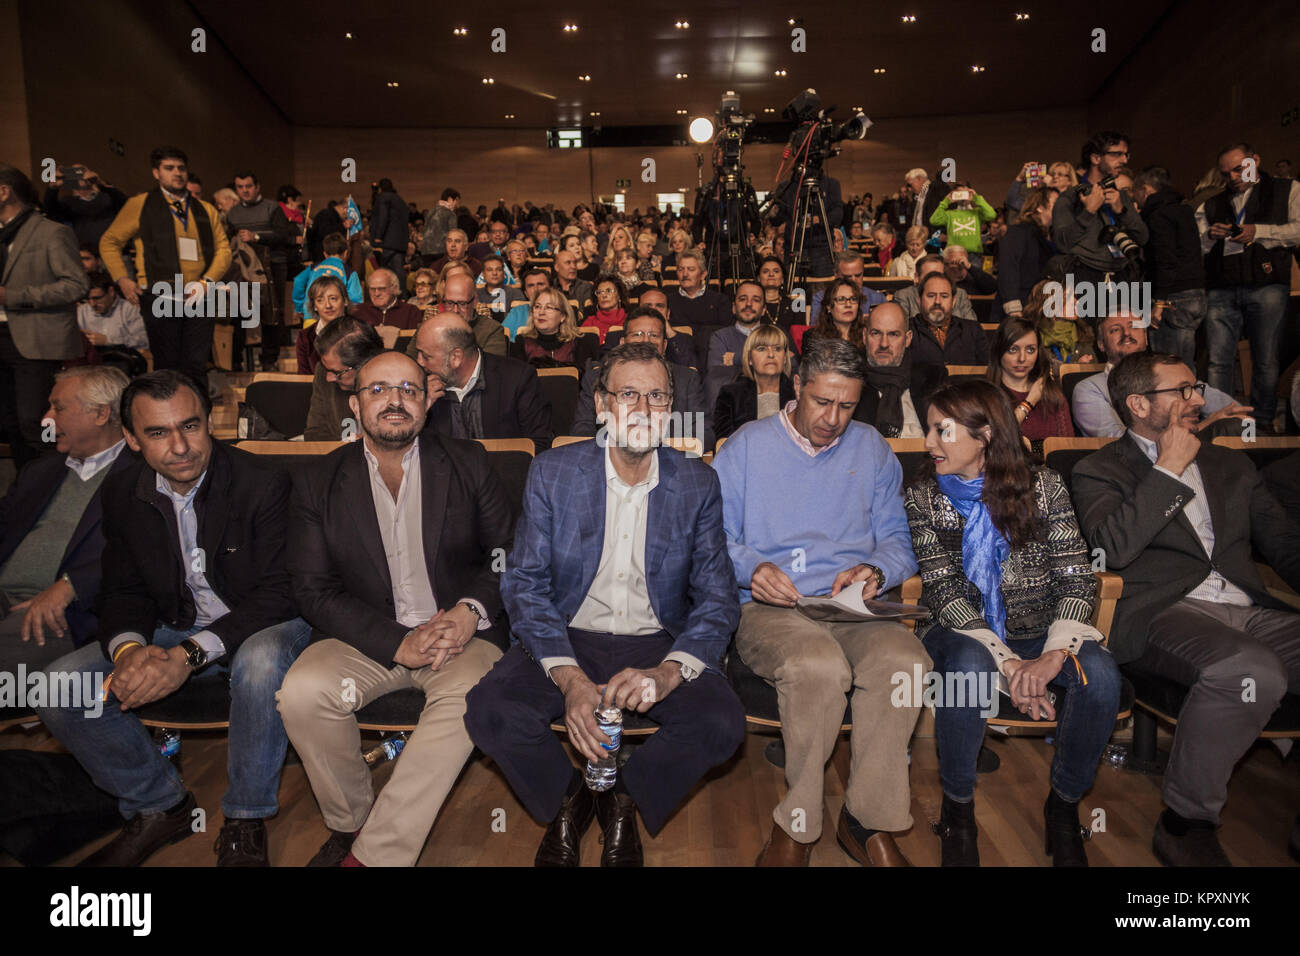 December 17, 2017 - Salou, CataluÃ±a, Spain - Mariano Rajoy, President of Spain, in Salou town for support of the PP party candidates for the Catalunya elections. Credit: Celestino Arce/ZUMA Wire/Alamy Live News Stock Photo